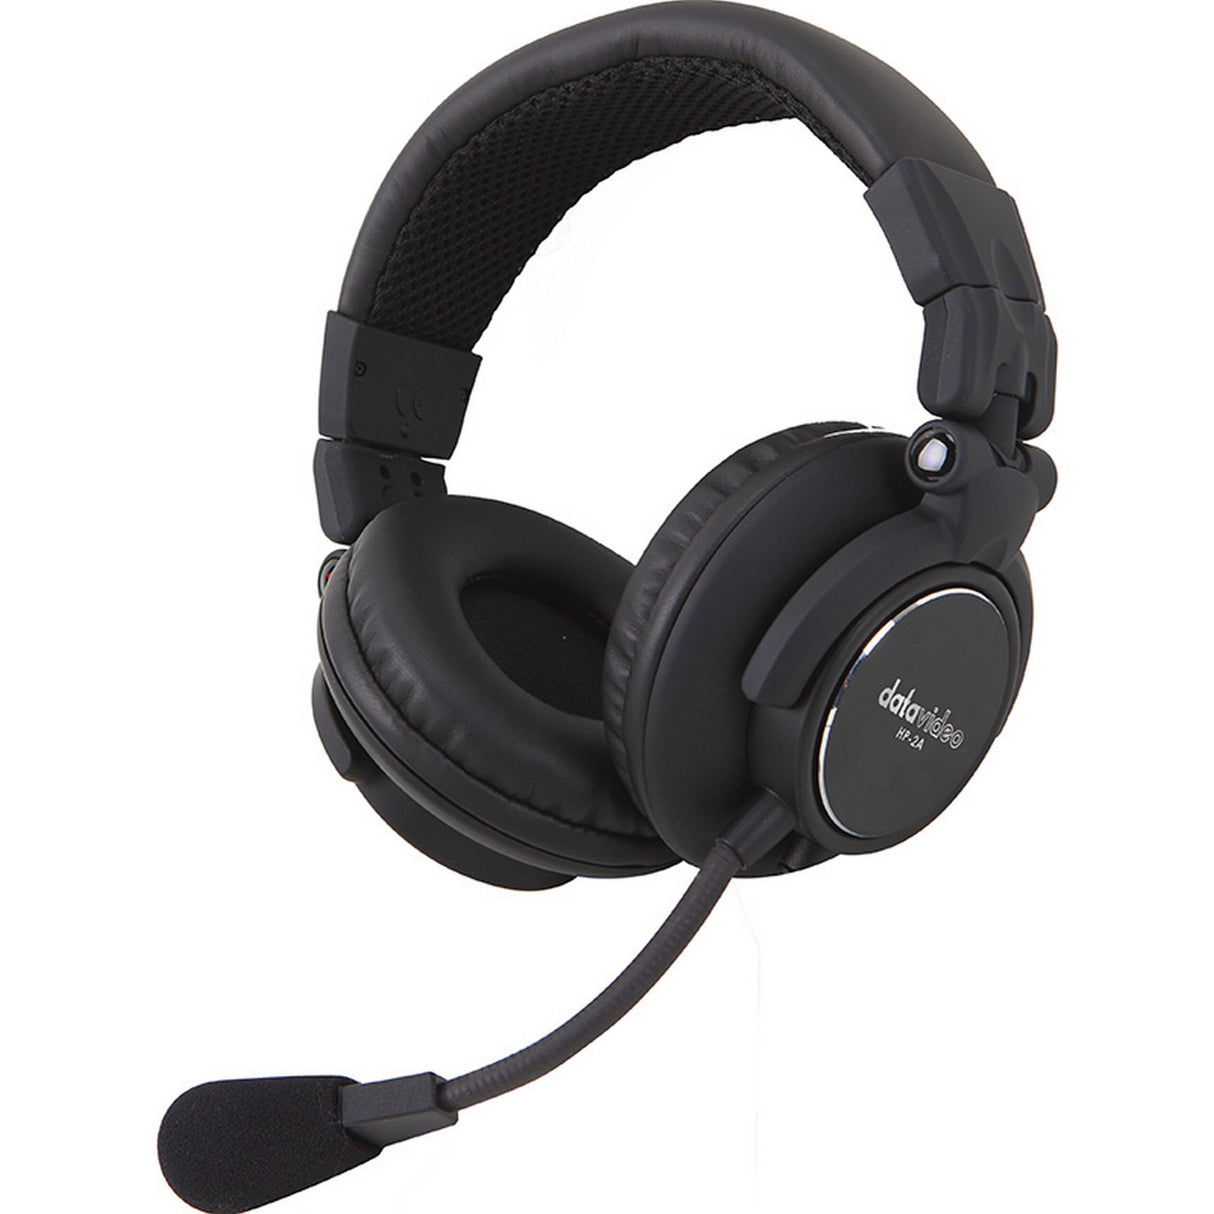 Datavideo HP2A Optional Dual-Ear Headset with Microphone for ITC-100